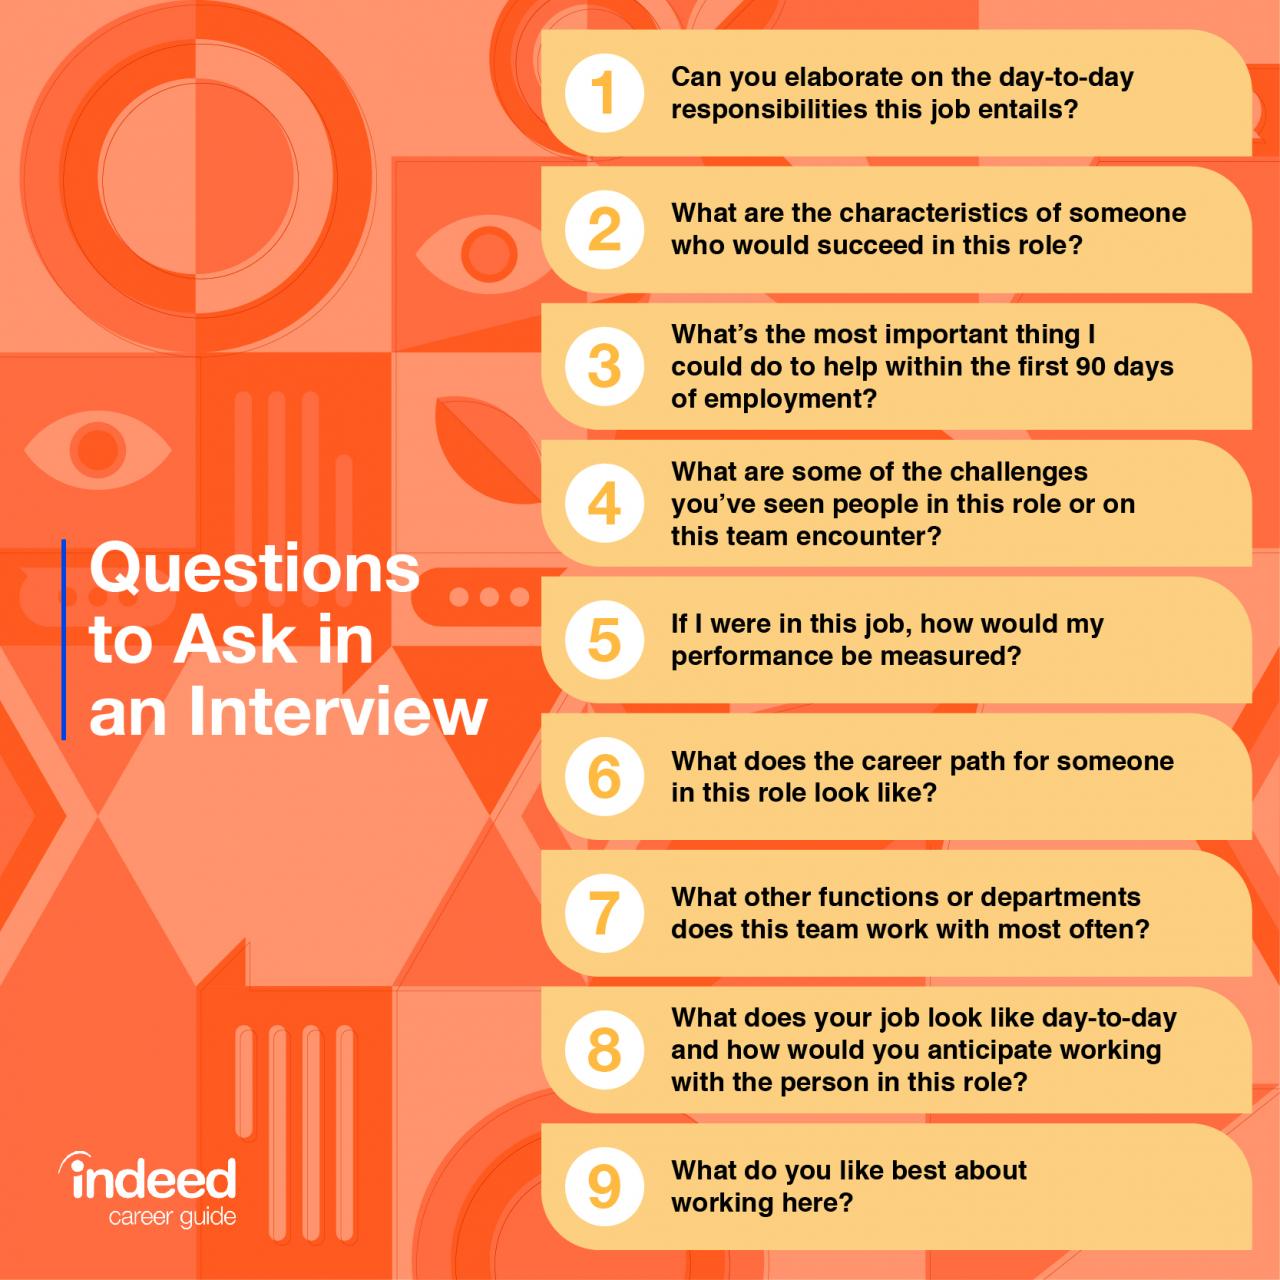 Business insider questions to ask in an interview